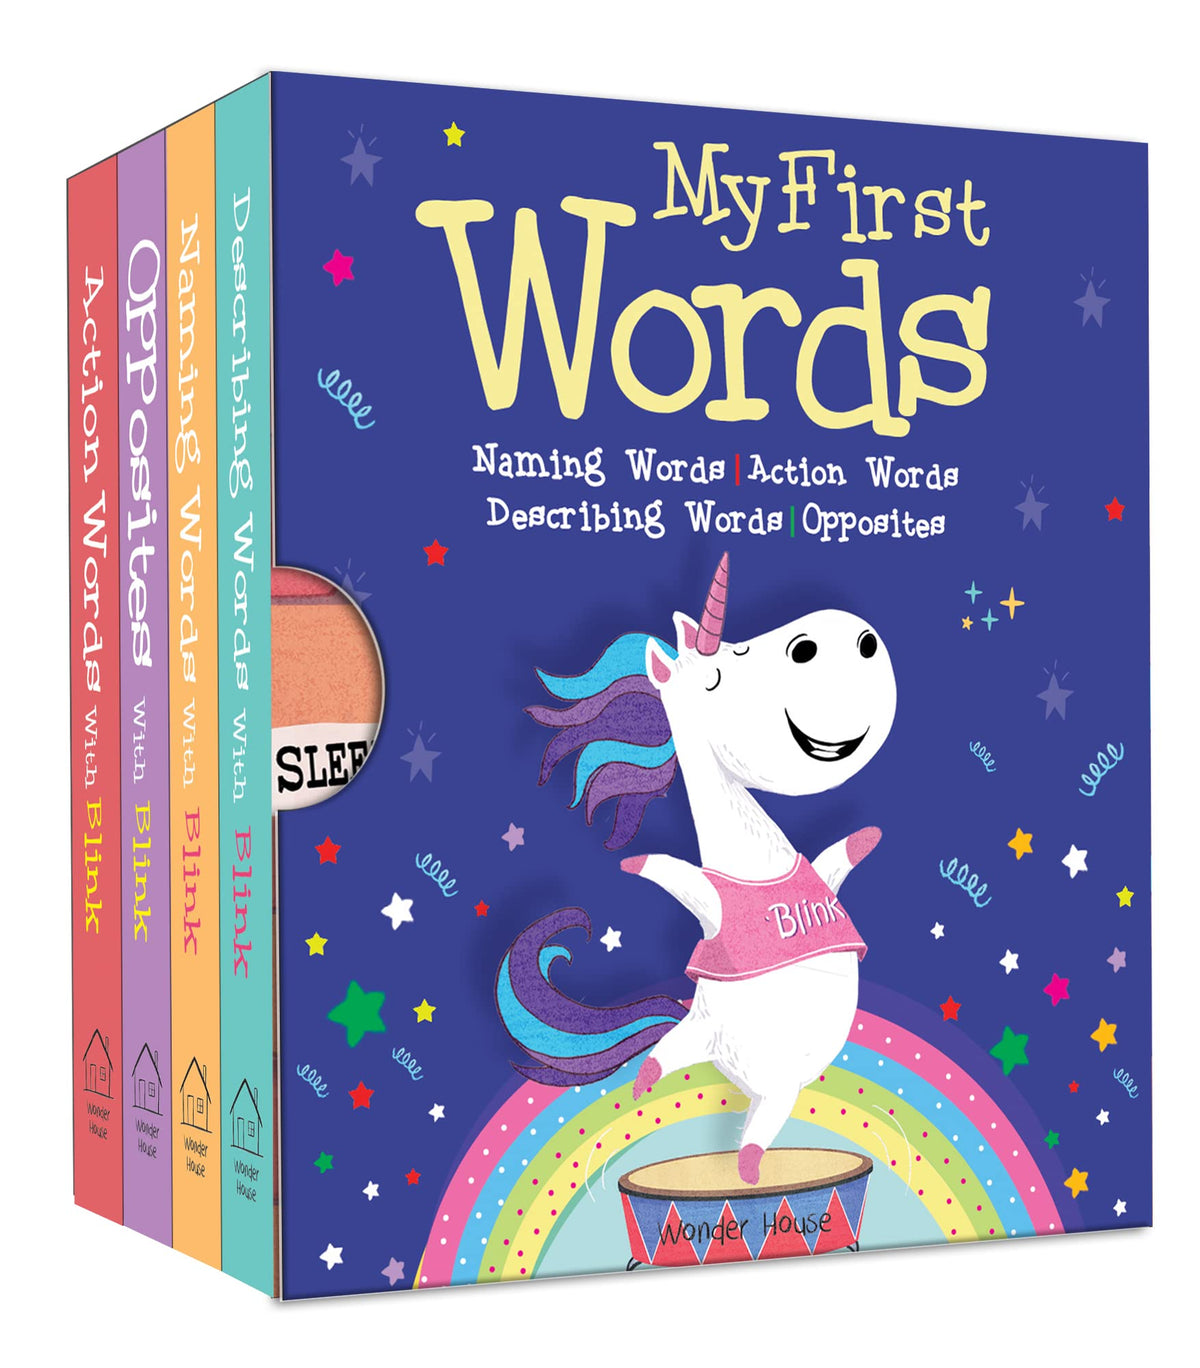 My First Words: Naming words, Action Words, Describing Words, Opposite Words - Box Set of 4 Board Books Board book